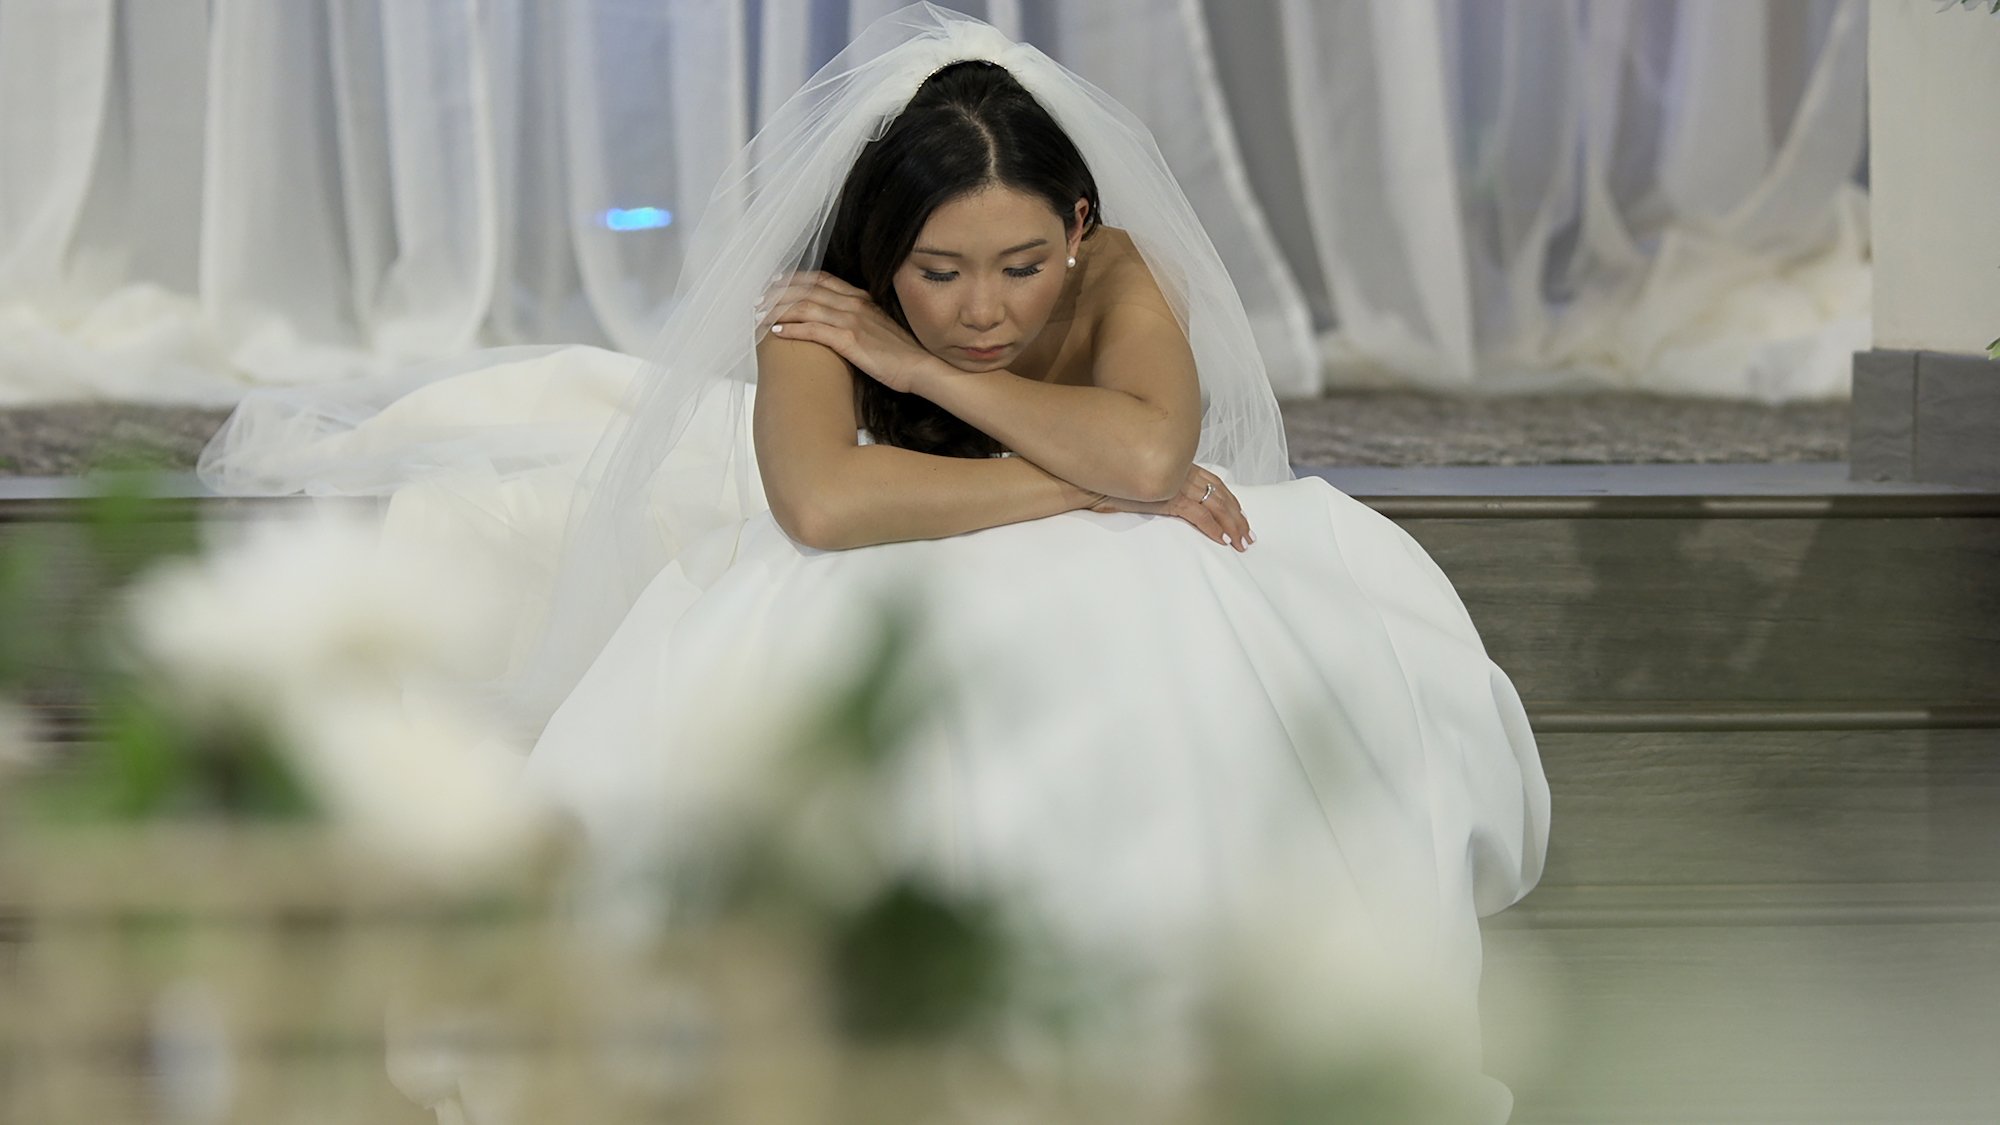 'Love Is Blind: After the Altar' star Natalie after ending things with Shayne. She's wearing a wedding dress while sitting on steps.